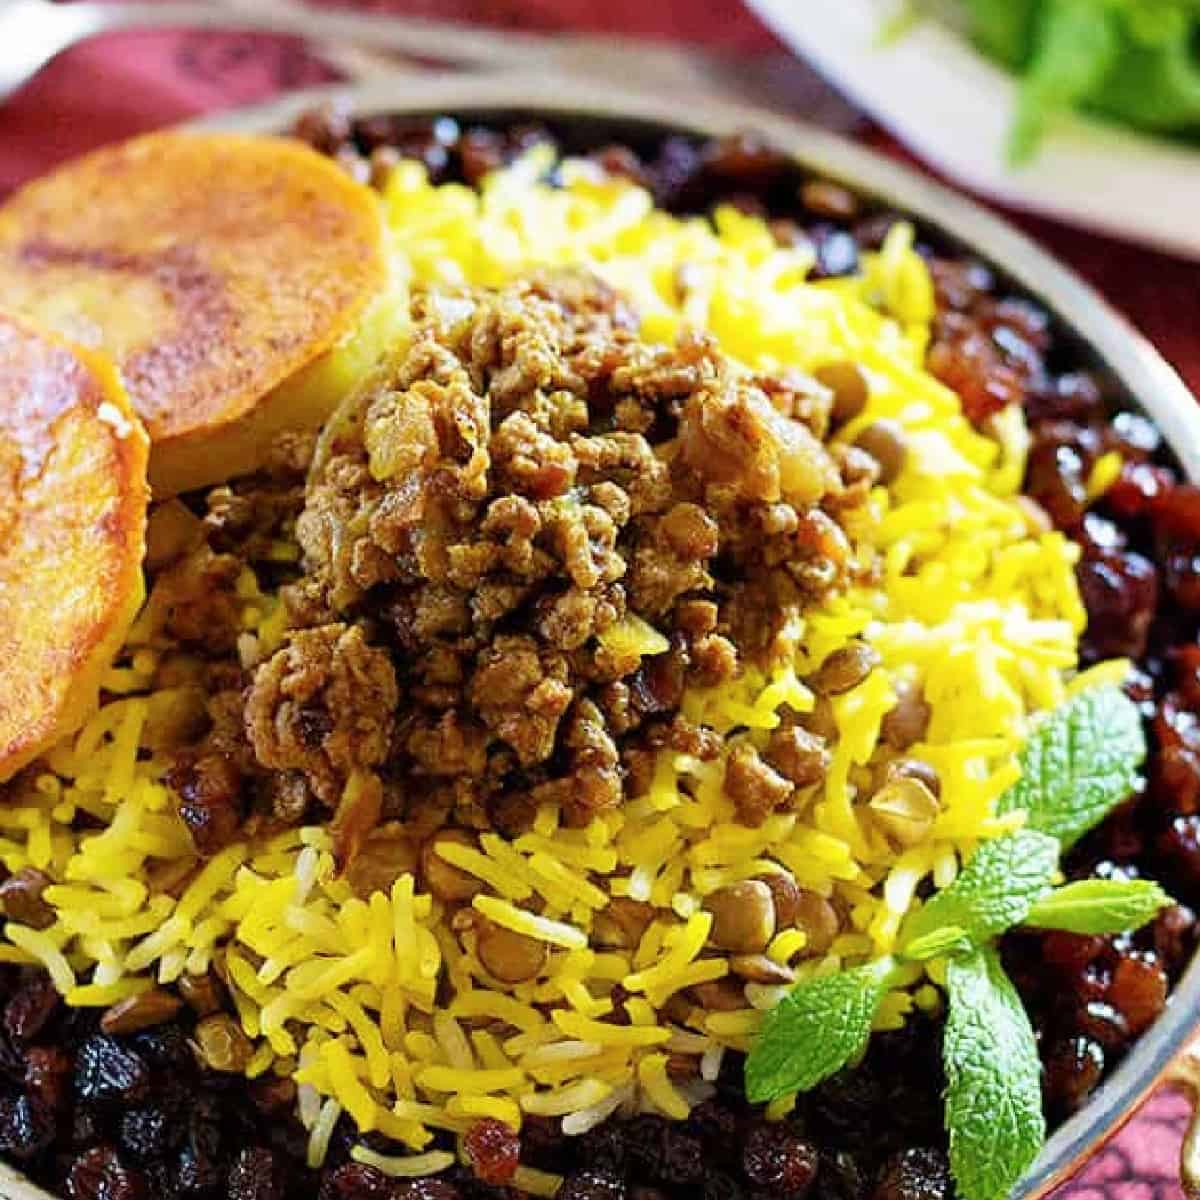 Adas Polo - Persian Lentil Rice is perfect for a weeknight meal. Rice and lentils served with delicious beef and raisins make the perfect healthy meal!
